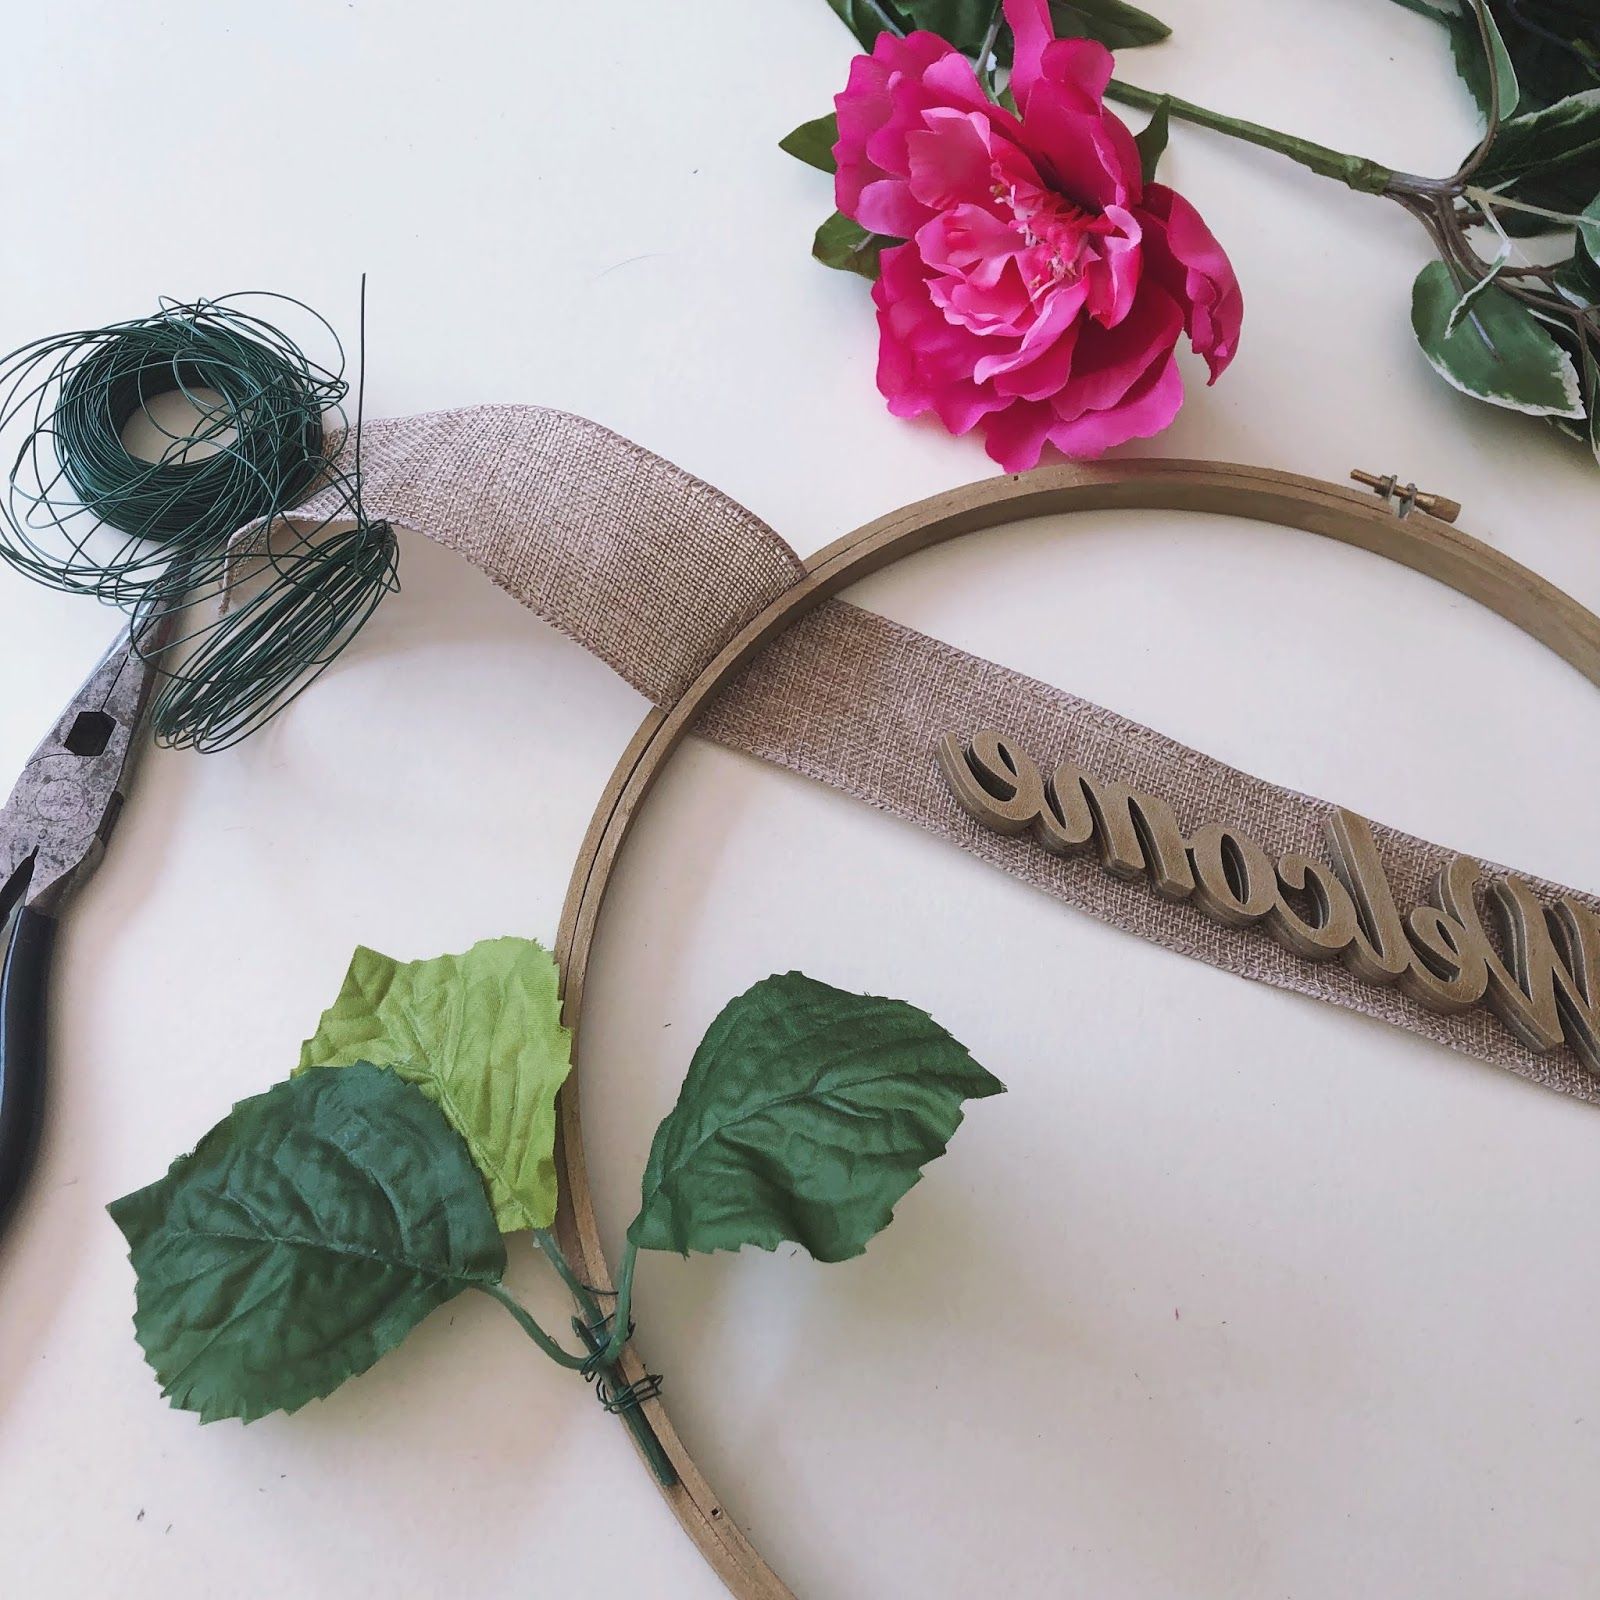 Matte Gun Metal 3 Tier Ring Chandeliers Throughout Most Up To Date Diy Summer Embroidery Hoop Wreath – Curlycraftymom (View 6 of 12)